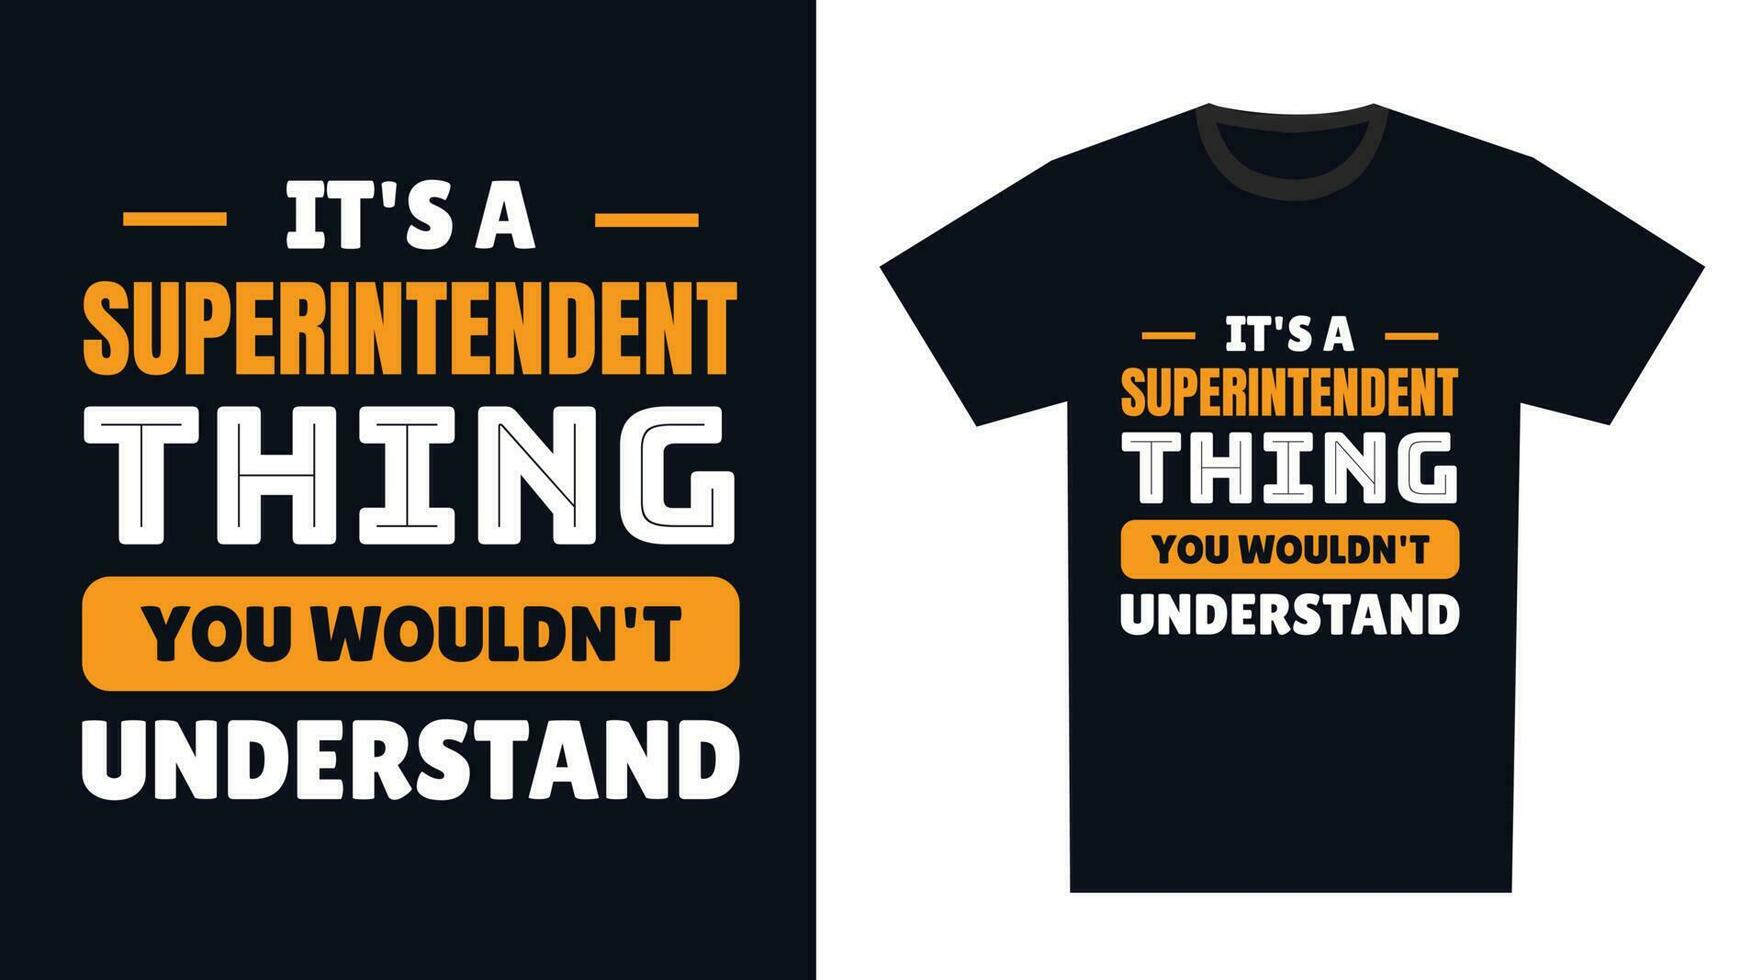 Superintendent T Shirt Design. It's a Superintendent Thing, You Wouldn't Understand vector